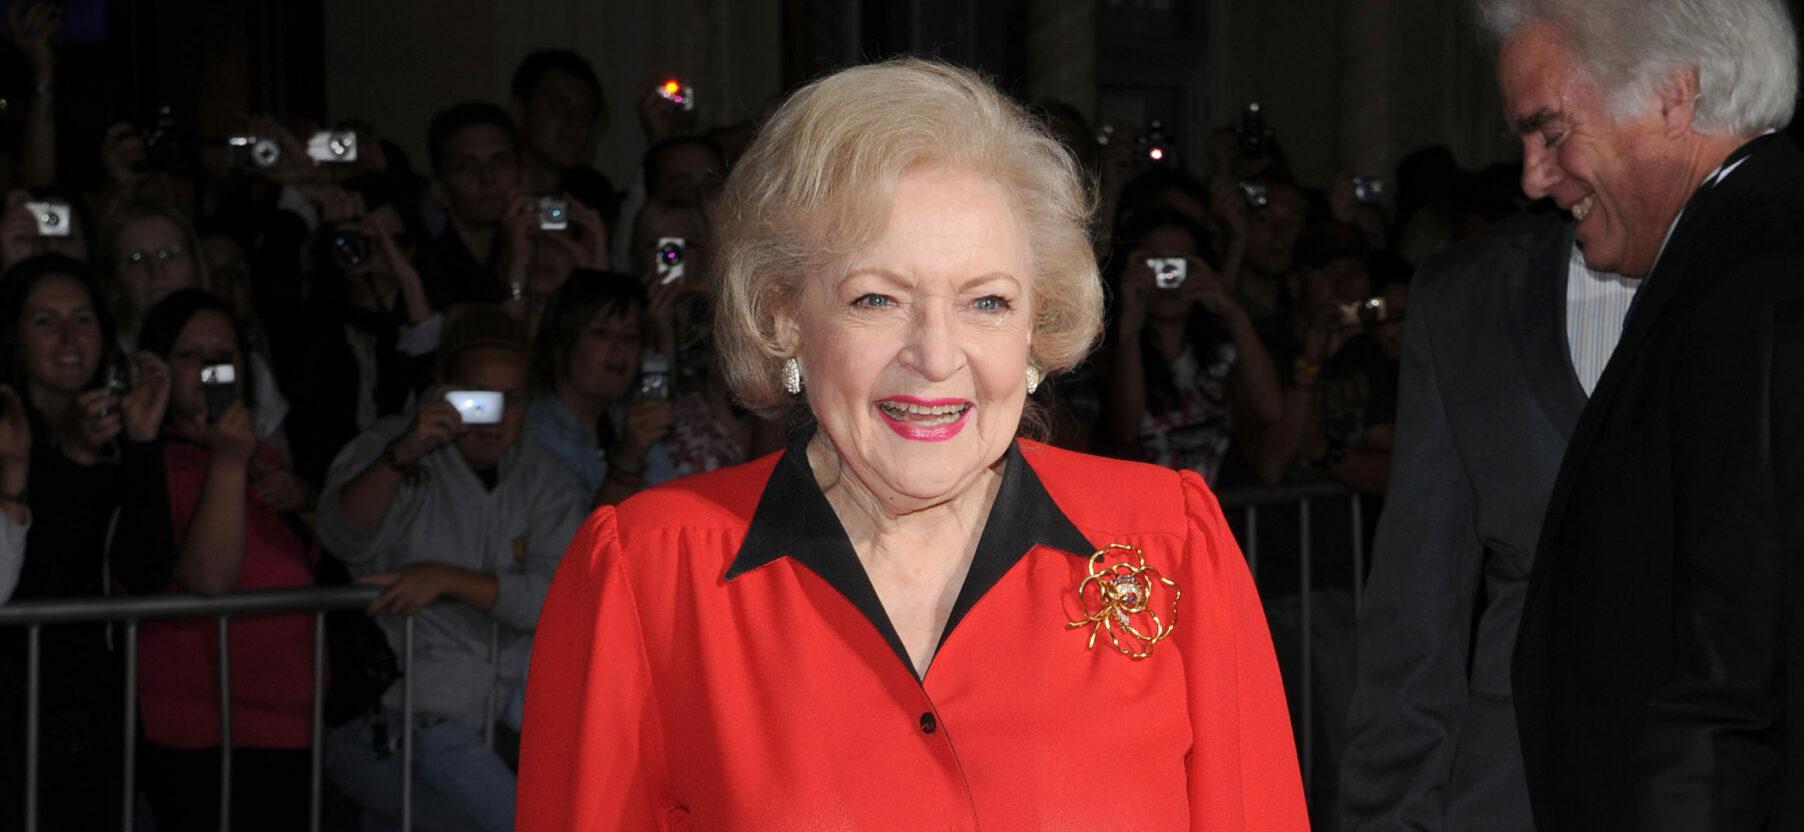 2003 Emmy Creative Arts Awards. Shrine Auditorium, Los Angeles, CA. 13 Sep 2003 Pictured: Betty White. Photo credit: AXELLE/BAUER-GRIFFIN / MEGA TheMegaAgency.com +1 888 505 6342 (Mega Agency TagID: MEGA816918_017.jpg) [Photo via Mega Agency]